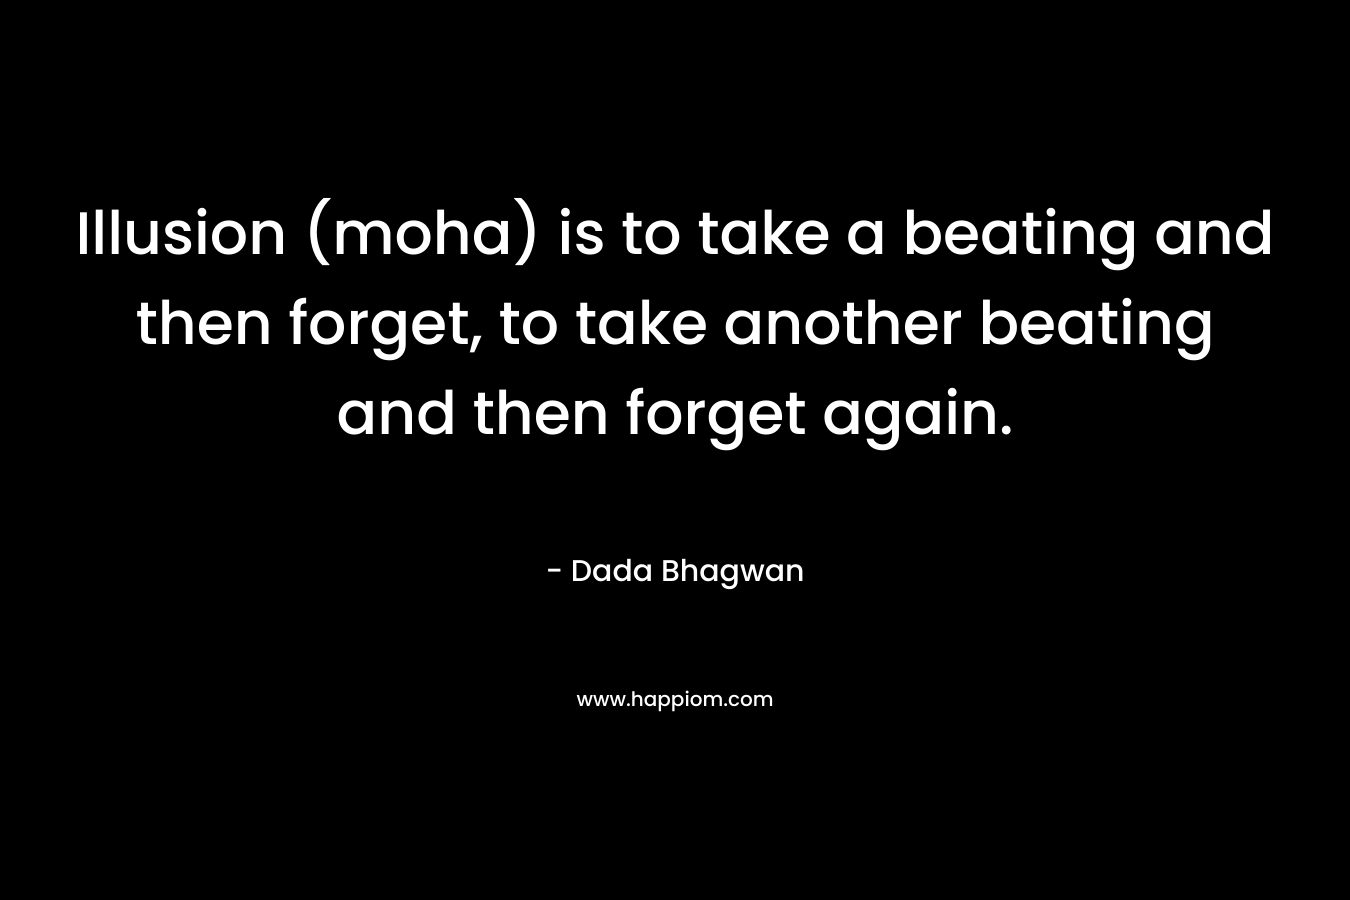 Illusion (moha) is to take a beating and then forget, to take another beating and then forget again.